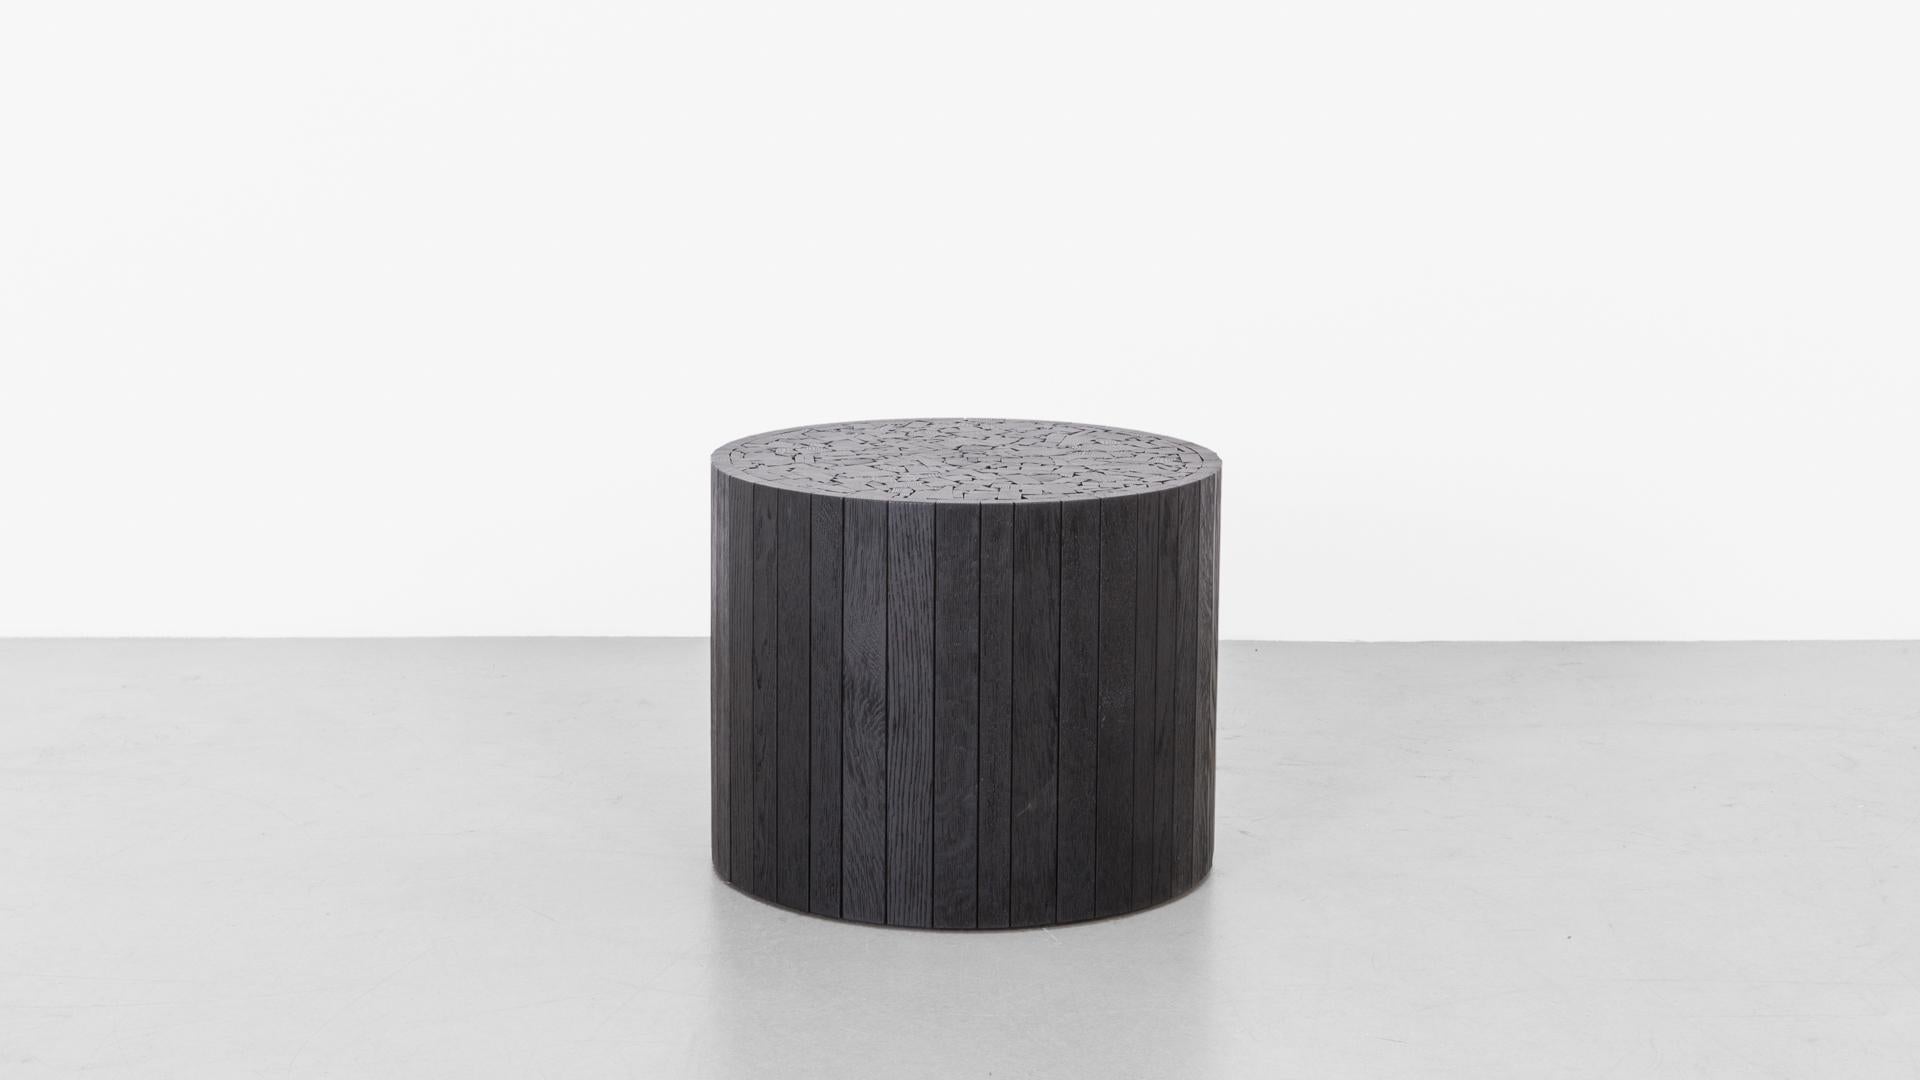 A beloved Uhuru piece, the Stoolen is crafted from black oak offcuts that are carefully hand-fitted into a unique pattern. The Stoolen works well as an end table, stool, or coffee table. Originating from the necessity for materials, our exploration